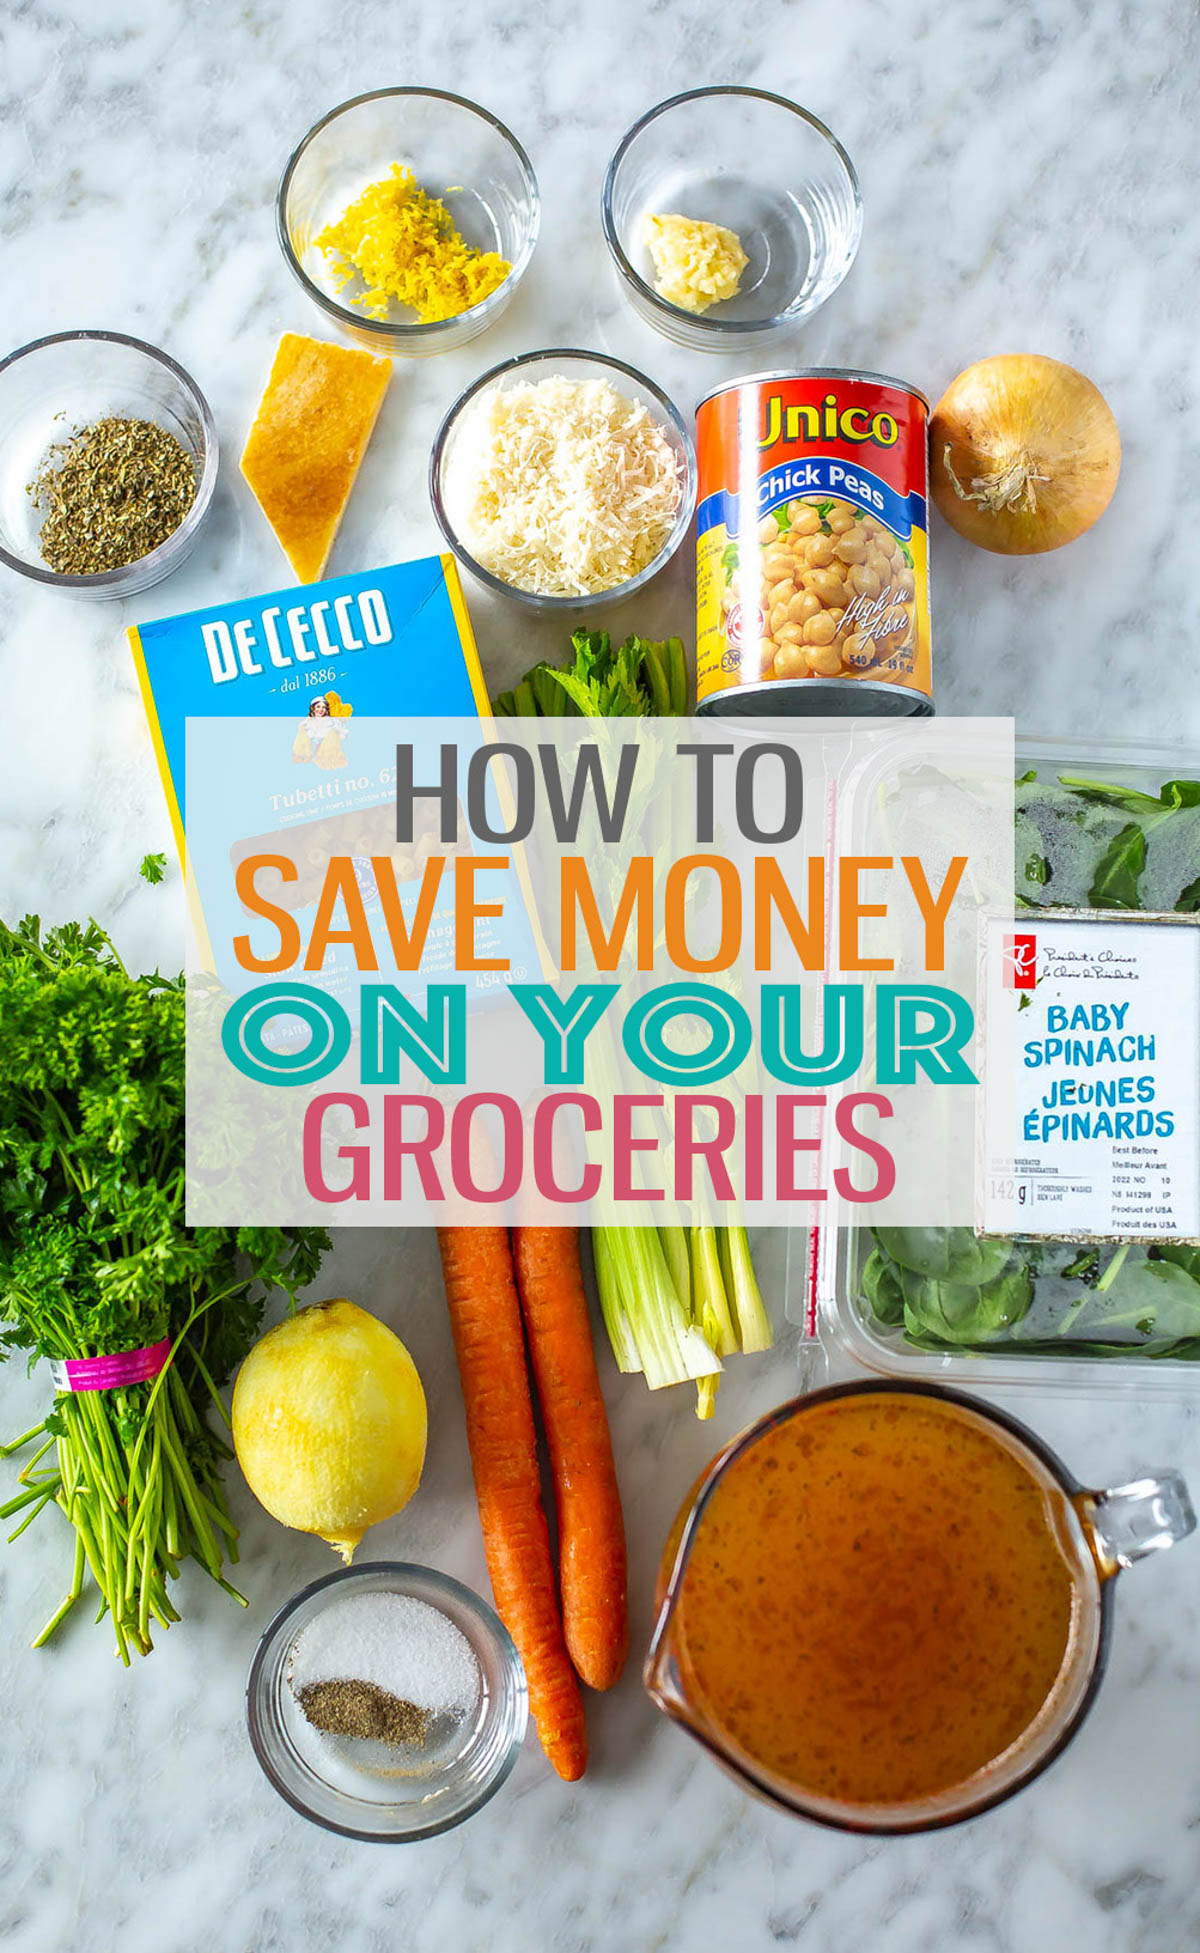 A counter with an assortment of groceries with the text "How to Save Money on Your Groceries" layered over top.